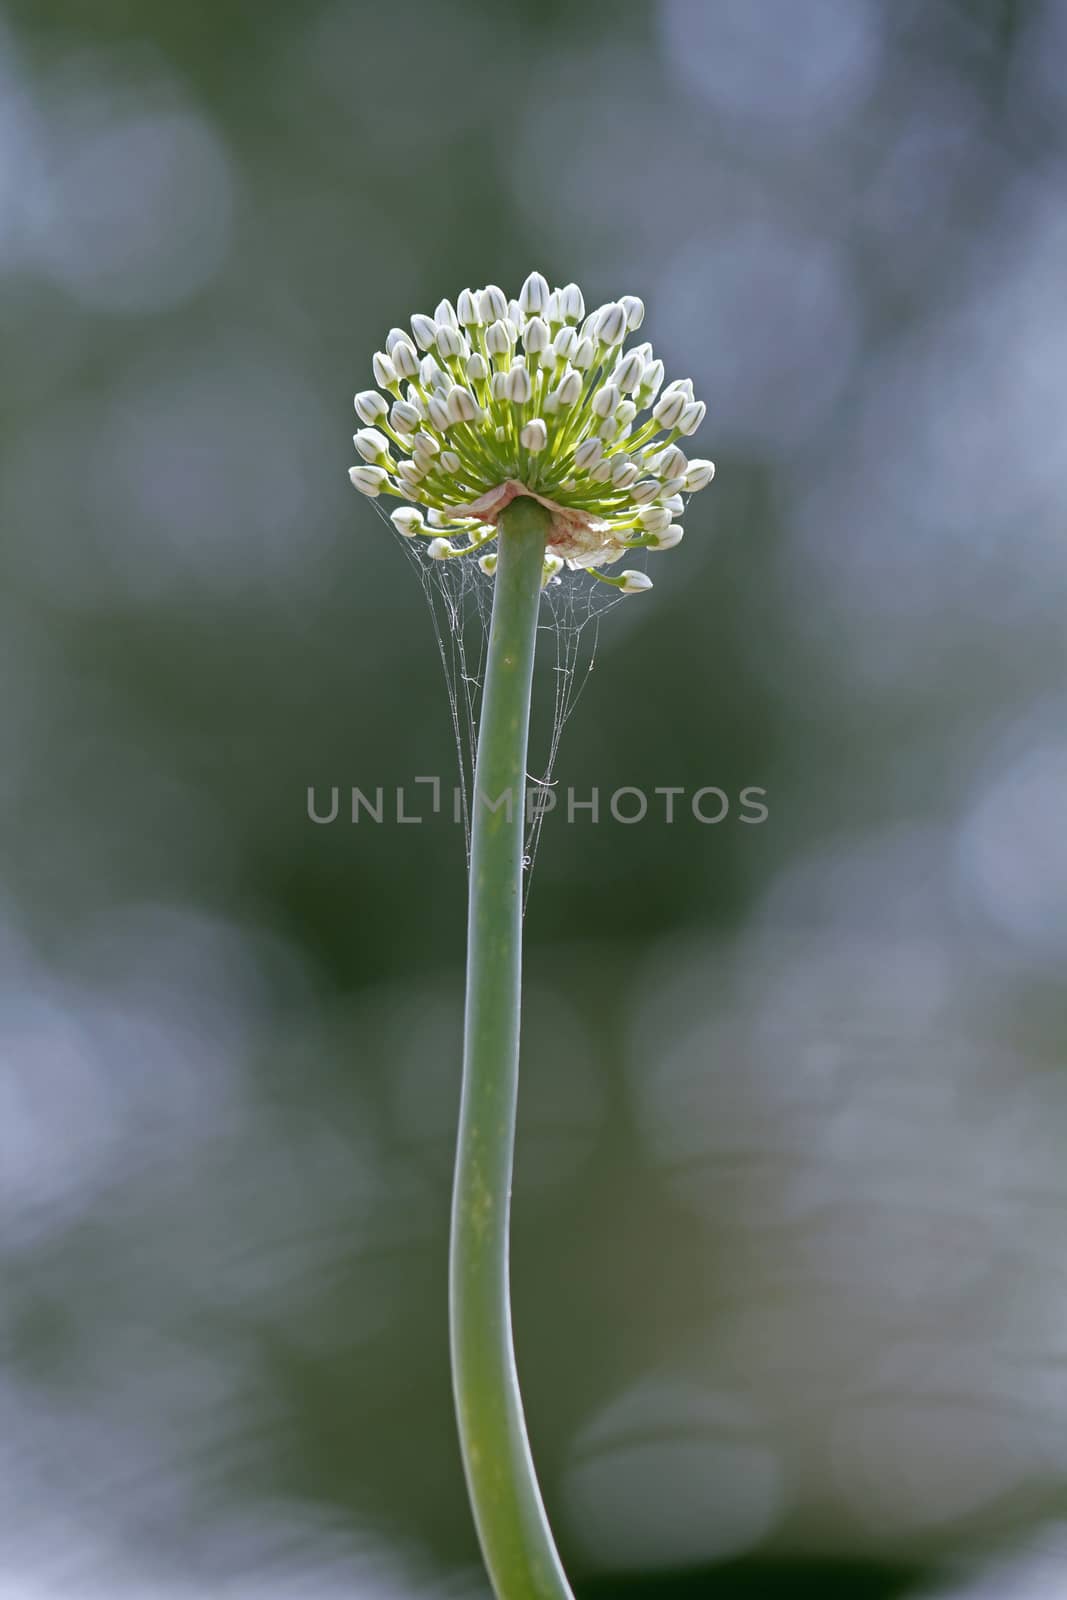 Flower of Onion, Allium cepa. The onion also known as the bulb onion or common onion, is used as a vegetable and is the most widely cultivated species of the genus Allium.